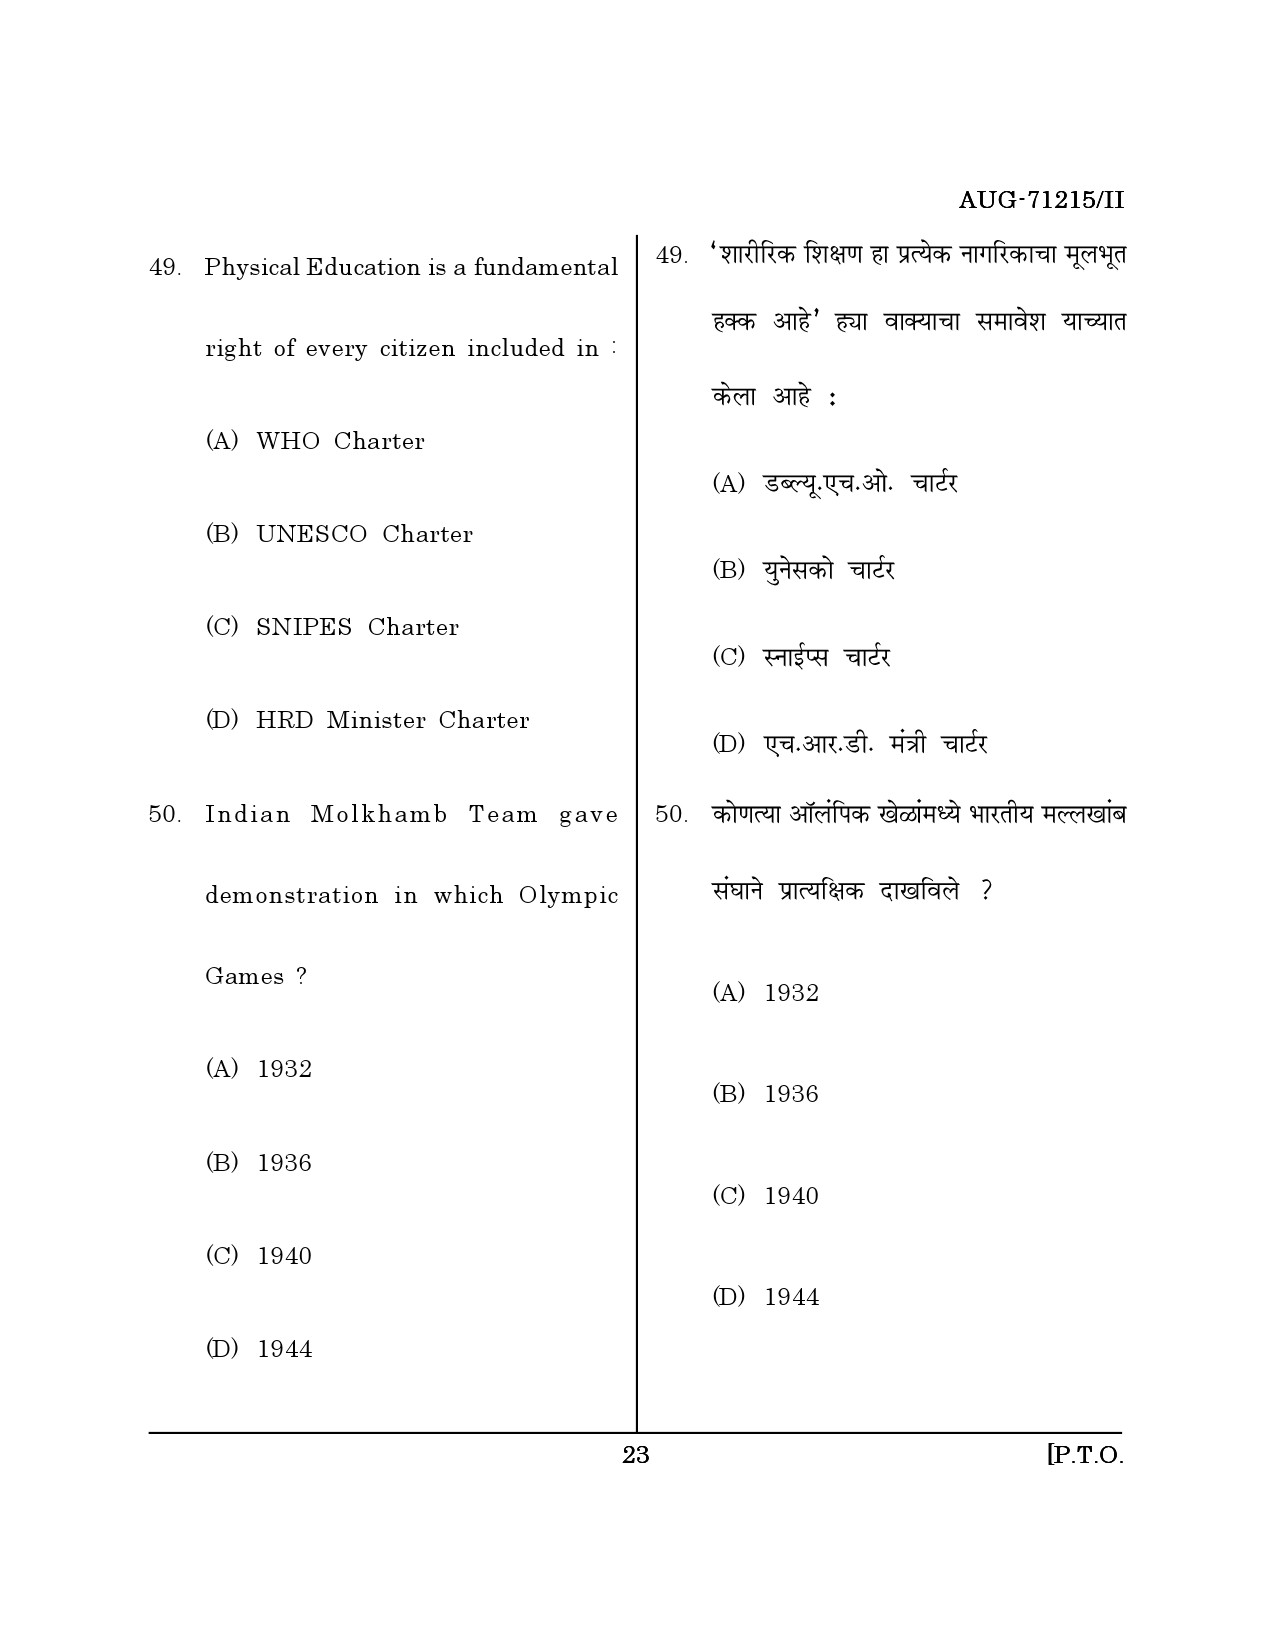 Maharashtra SET Physical Education Question Paper II August 2015 22